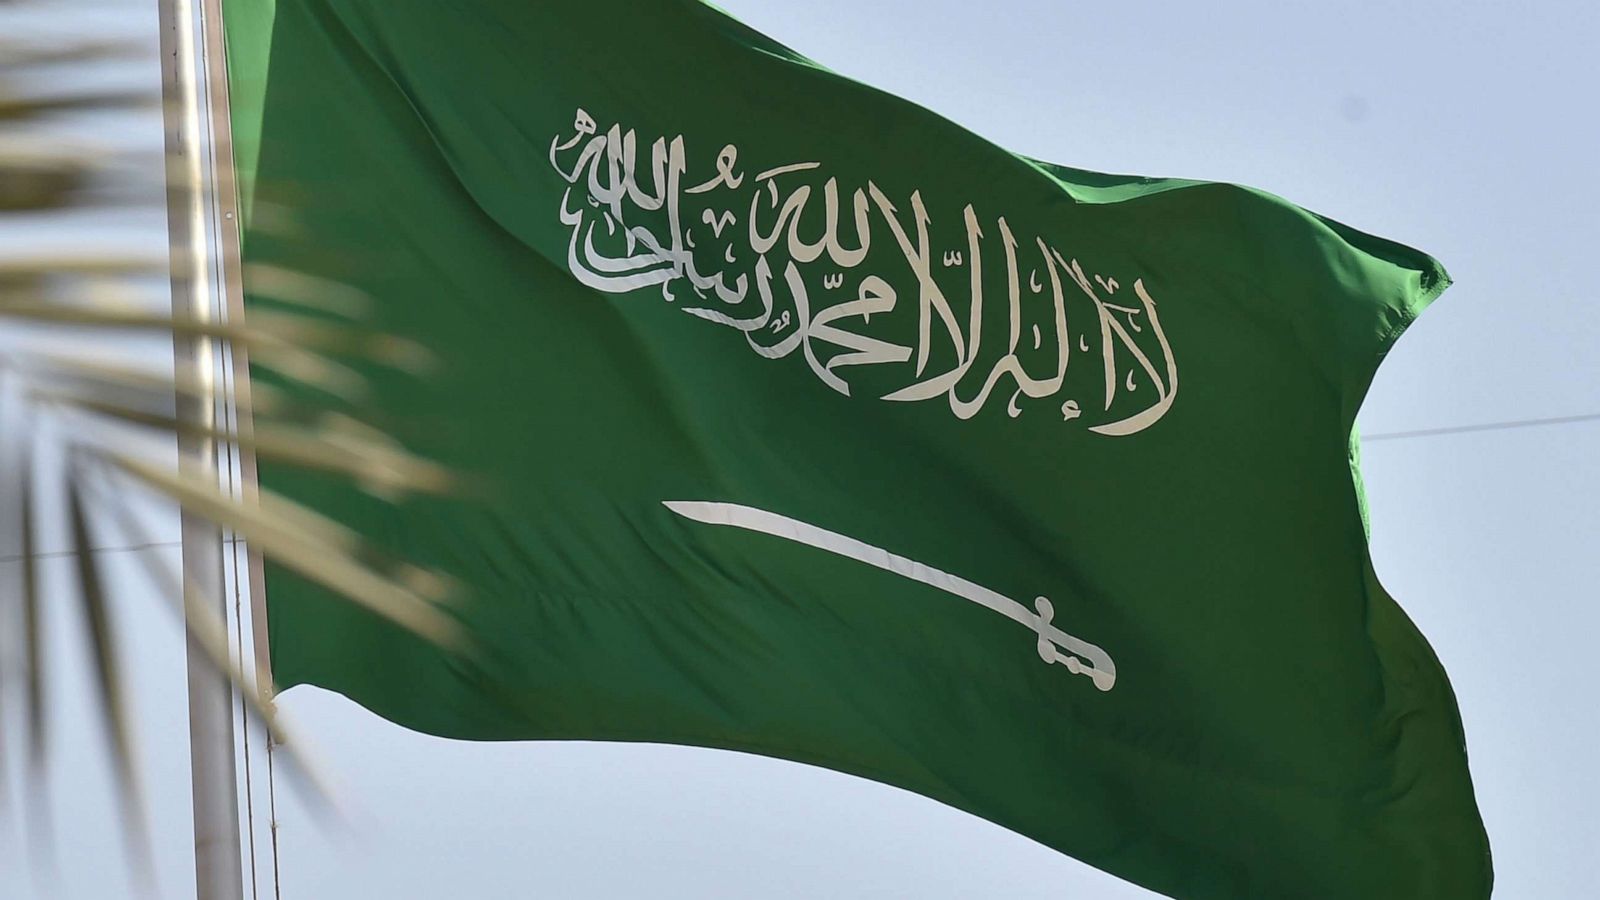 Saudi Arabia executes military personnel for treason amid growing human rights concerns